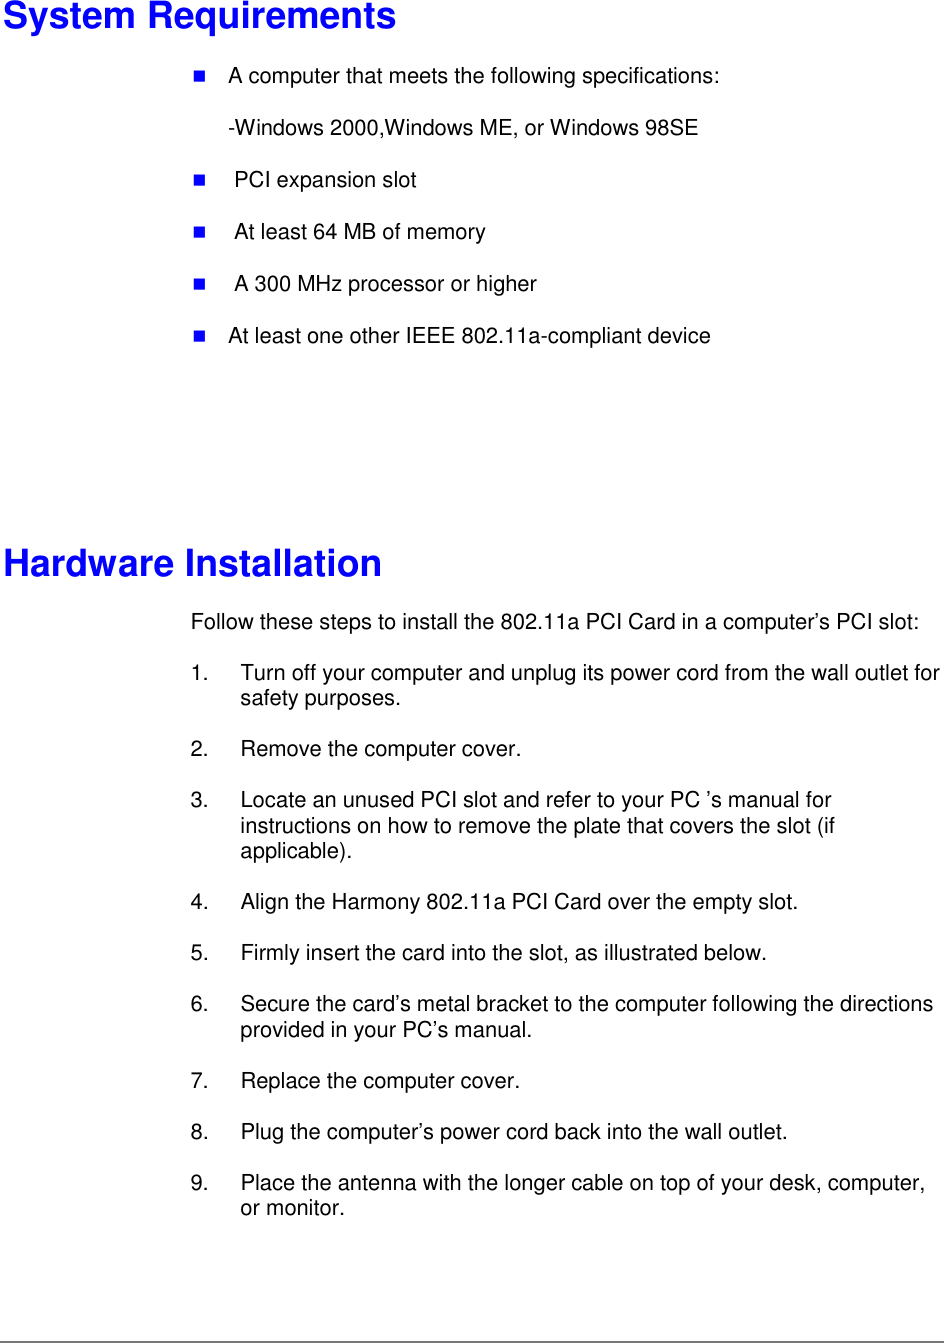 System Requirements&quot; A computer that meets the following specifications:-Windows 2000,Windows ME, or Windows 98SE&quot;  PCI expansion slot&quot;  At least 64 MB of memory&quot;  A 300 MHz processor or higher&quot; At least one other IEEE 802.11a-compliant deviceHardware InstallationFollow these steps to install the 802.11a PCI Card in a computer’s PCI slot:1.  Turn off your computer and unplug its power cord from the wall outlet forsafety purposes.2.  Remove the computer cover.3.  Locate an unused PCI slot and refer to your PC ’s manual forinstructions on how to remove the plate that covers the slot (ifapplicable).4.  Align the Harmony 802.11a PCI Card over the empty slot.5.  Firmly insert the card into the slot, as illustrated below.6.  Secure the card’s metal bracket to the computer following the directionsprovided in your PC’s manual.7.  Replace the computer cover.8.  Plug the computer’s power cord back into the wall outlet.9.  Place the antenna with the longer cable on top of your desk, computer,or monitor.